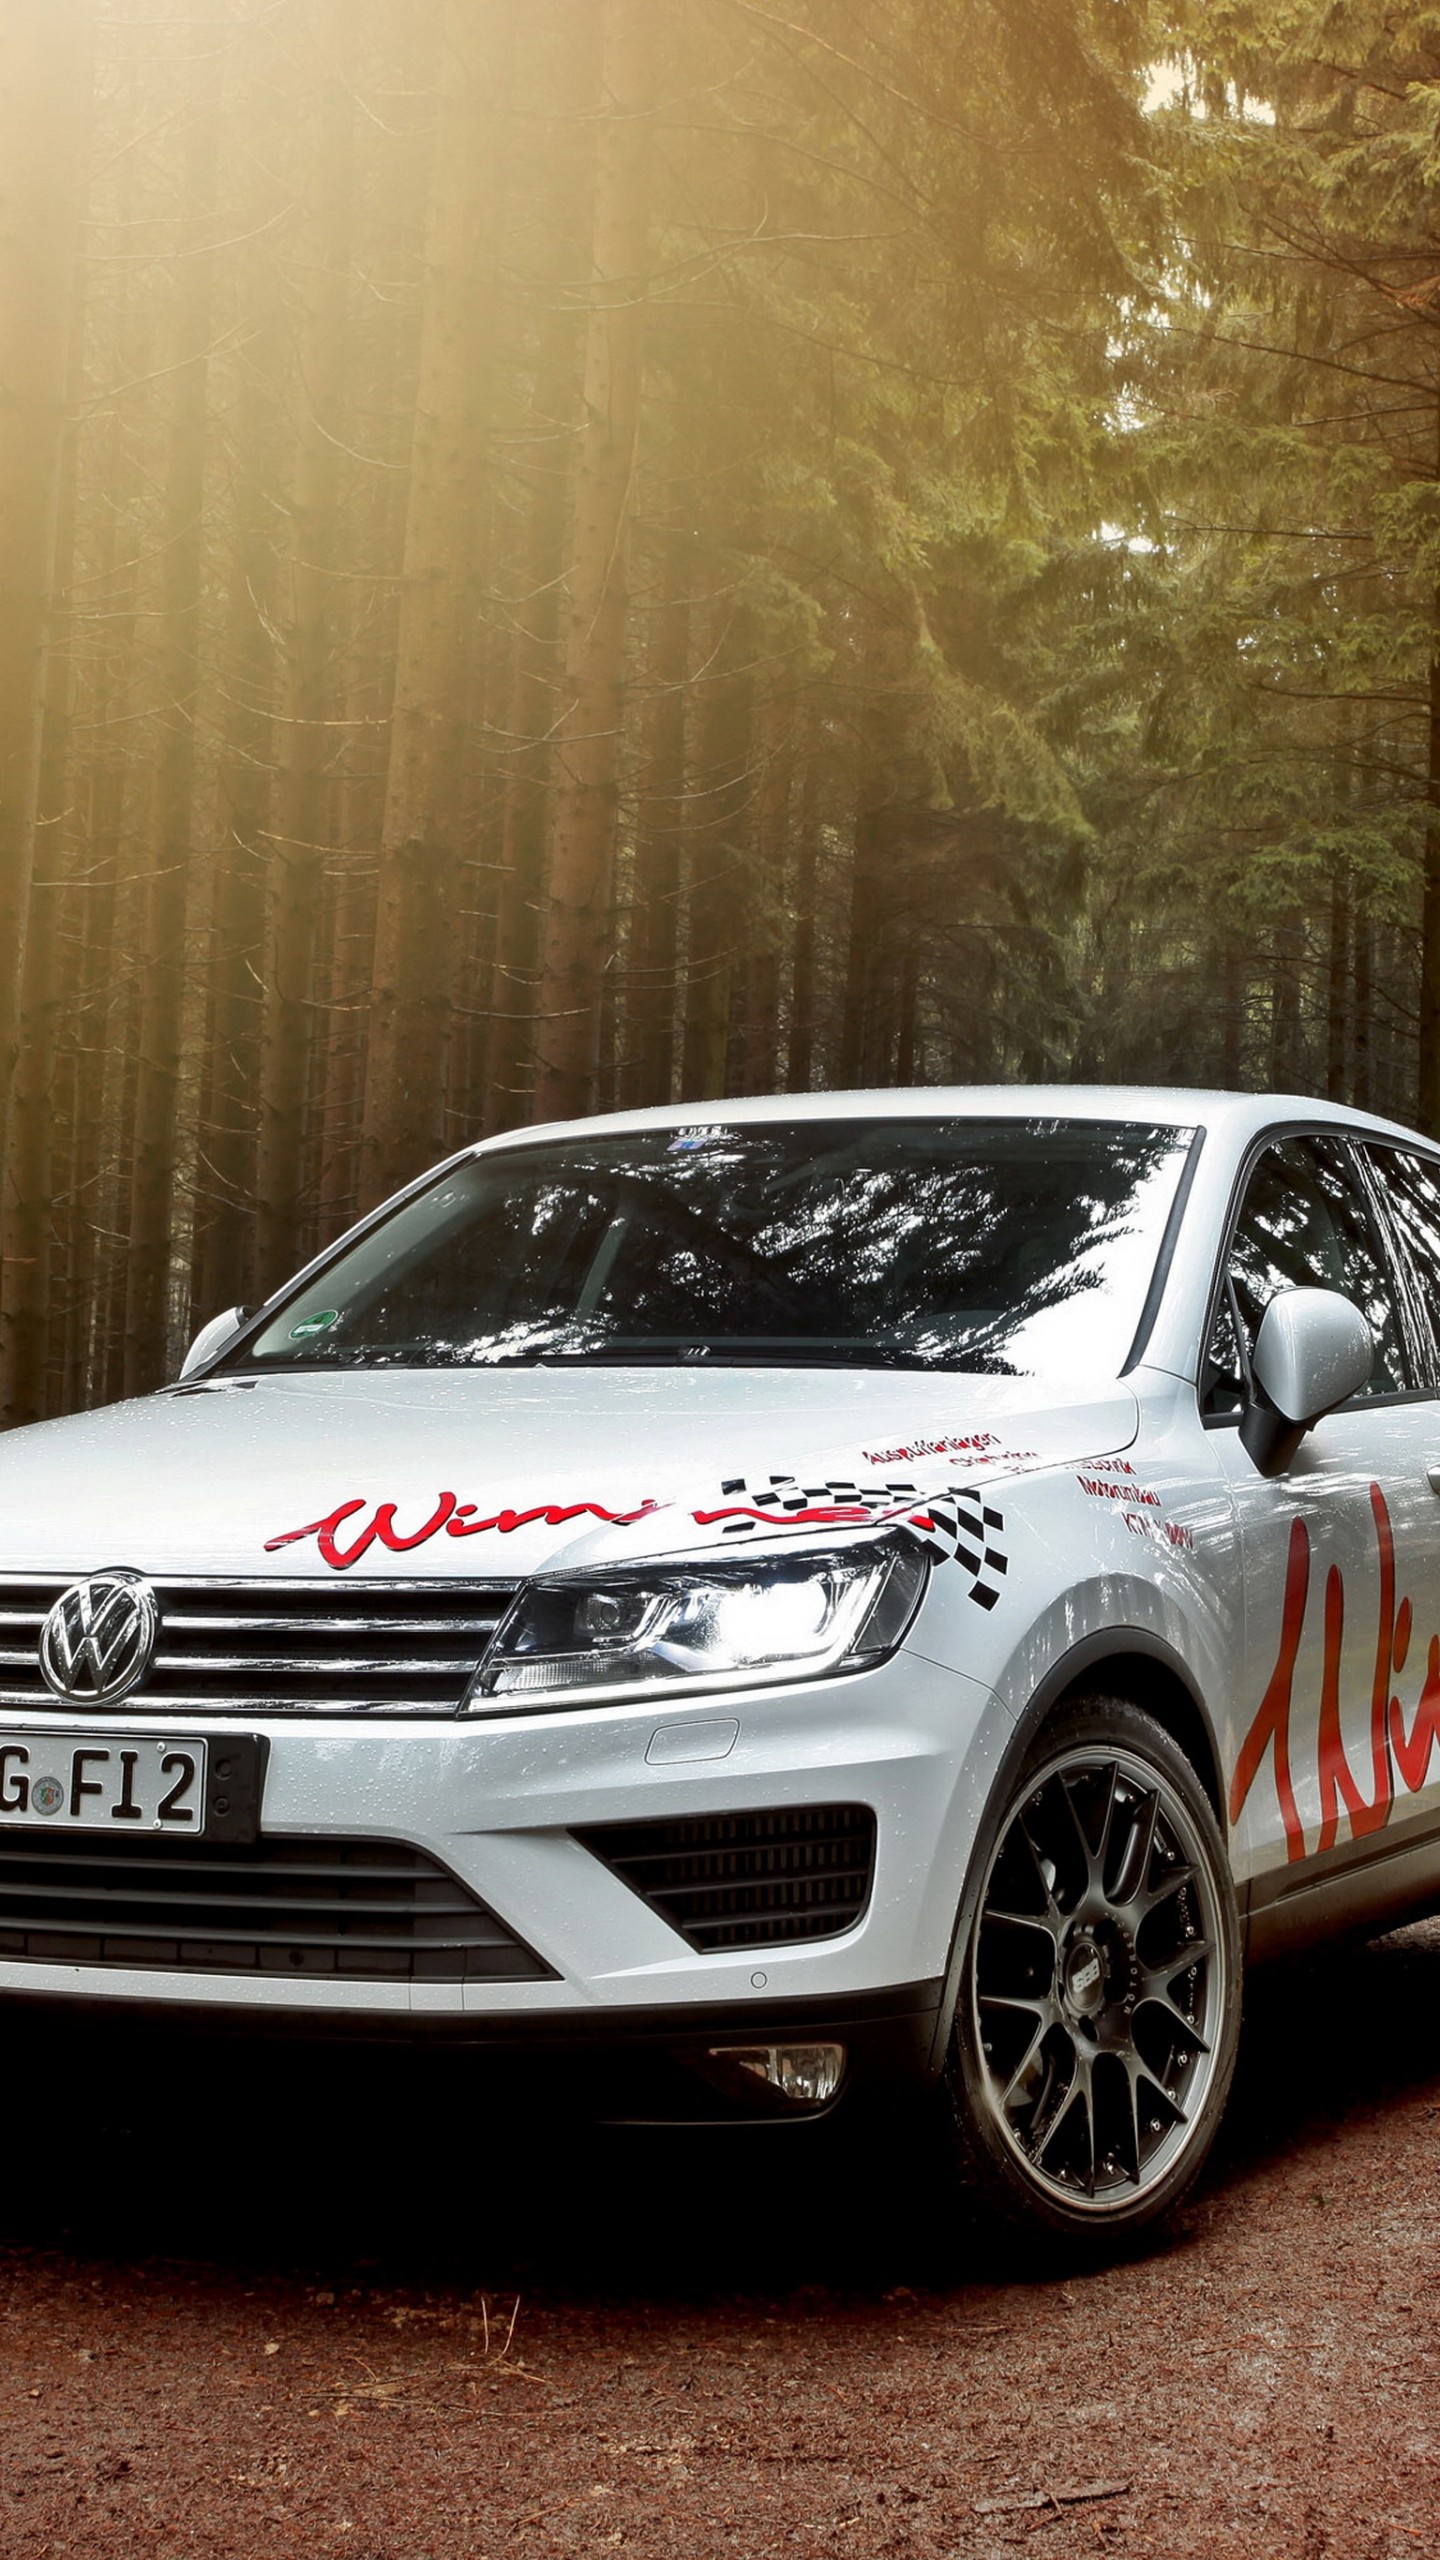 Volkswagen Touareg, Wimmer RS, White forest cars, 1440x2560 HD Handy